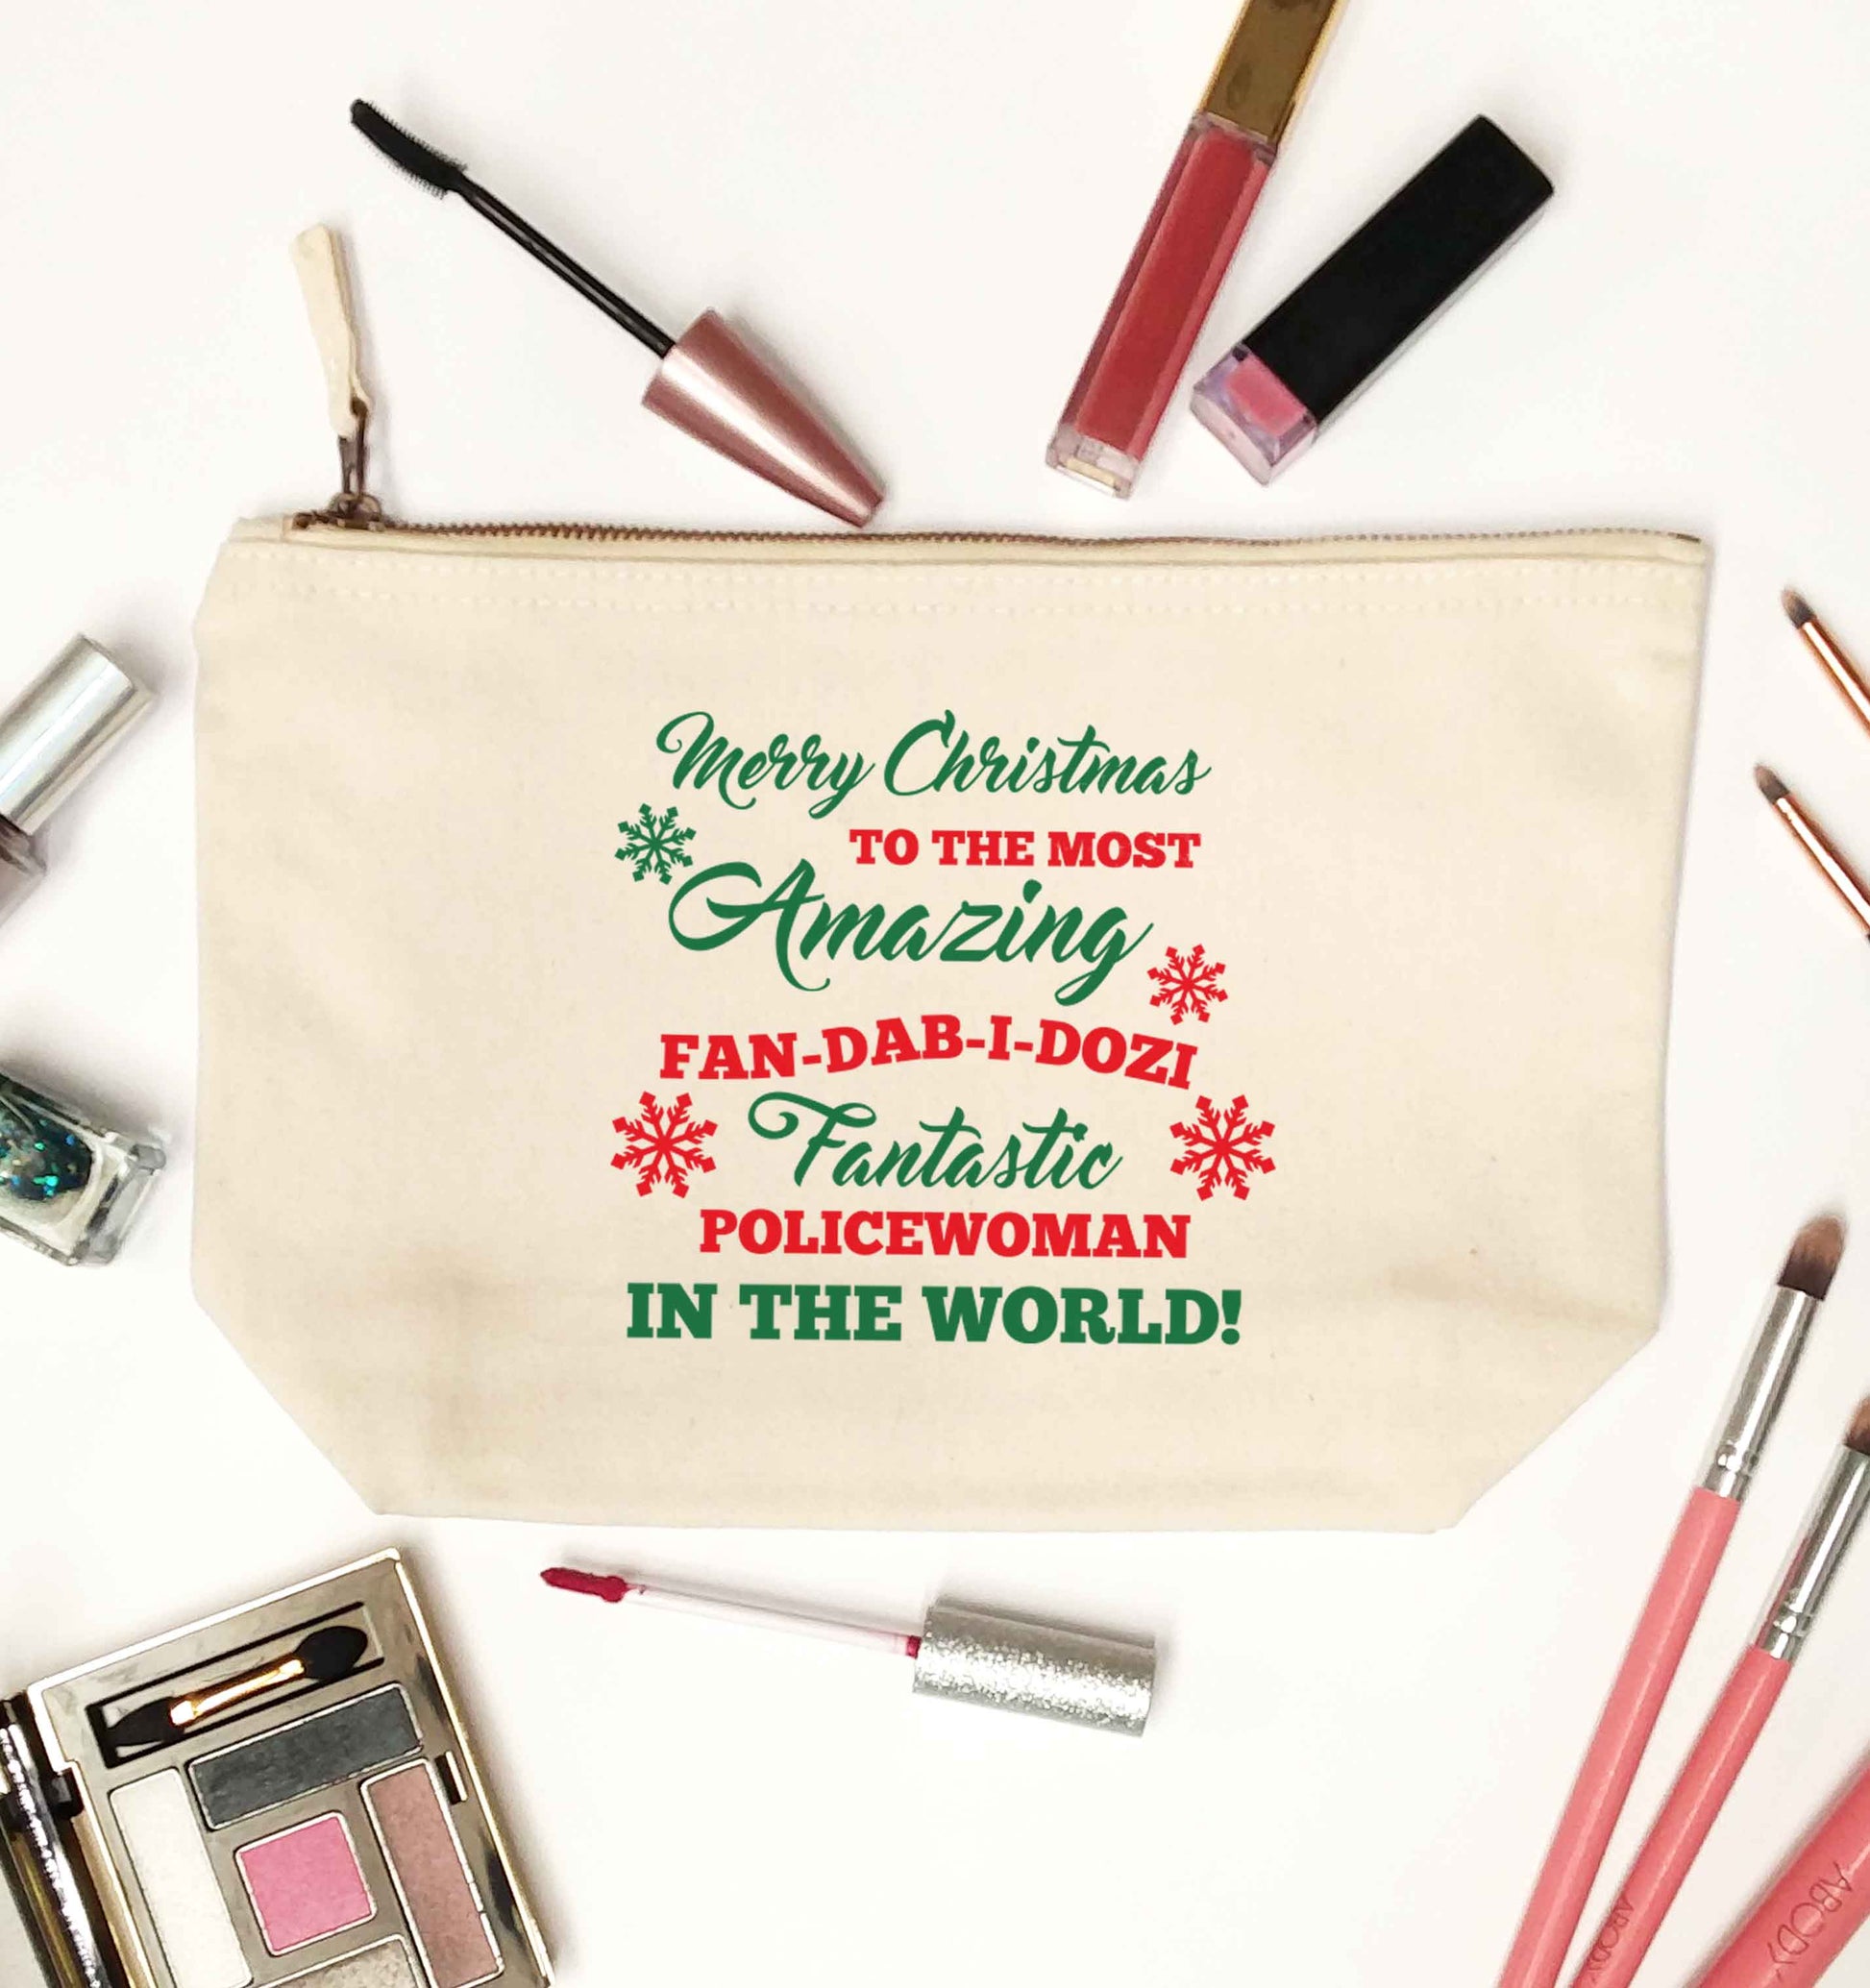 Merry Christmas to the most amazing policewoman in the world! natural makeup bag